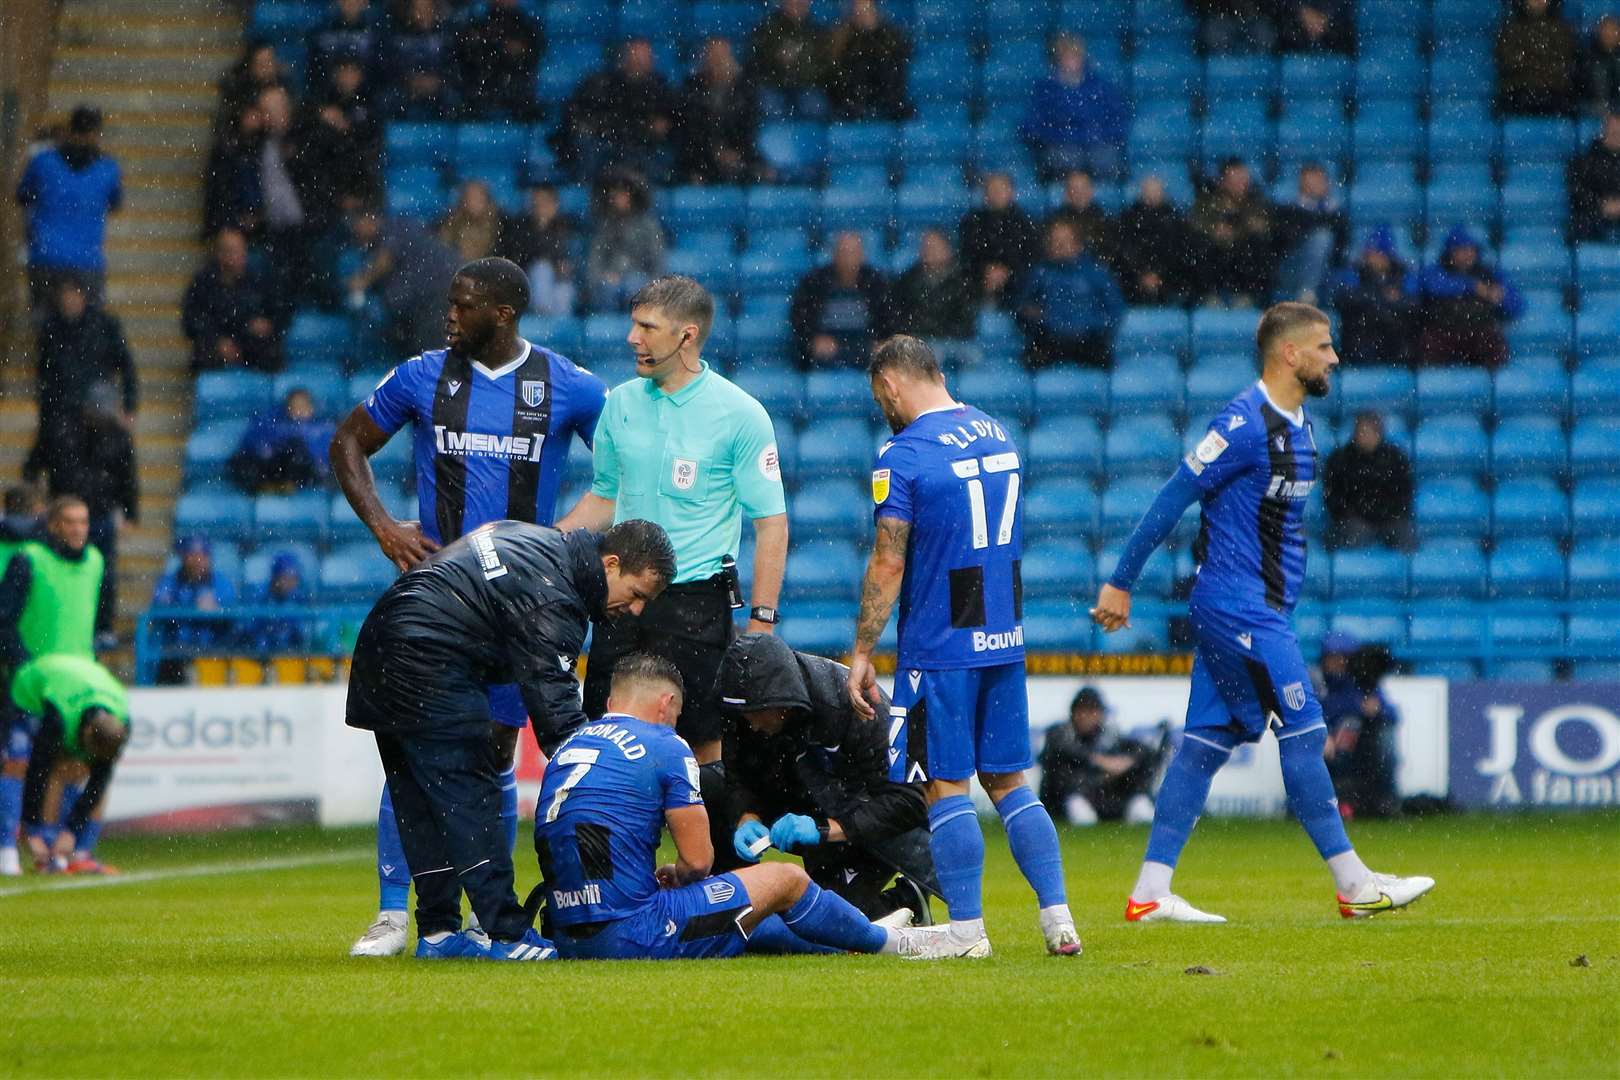 Alex MacDonald picked up a nasty cut to his leg which needed glueing together Picture: Andy Jones